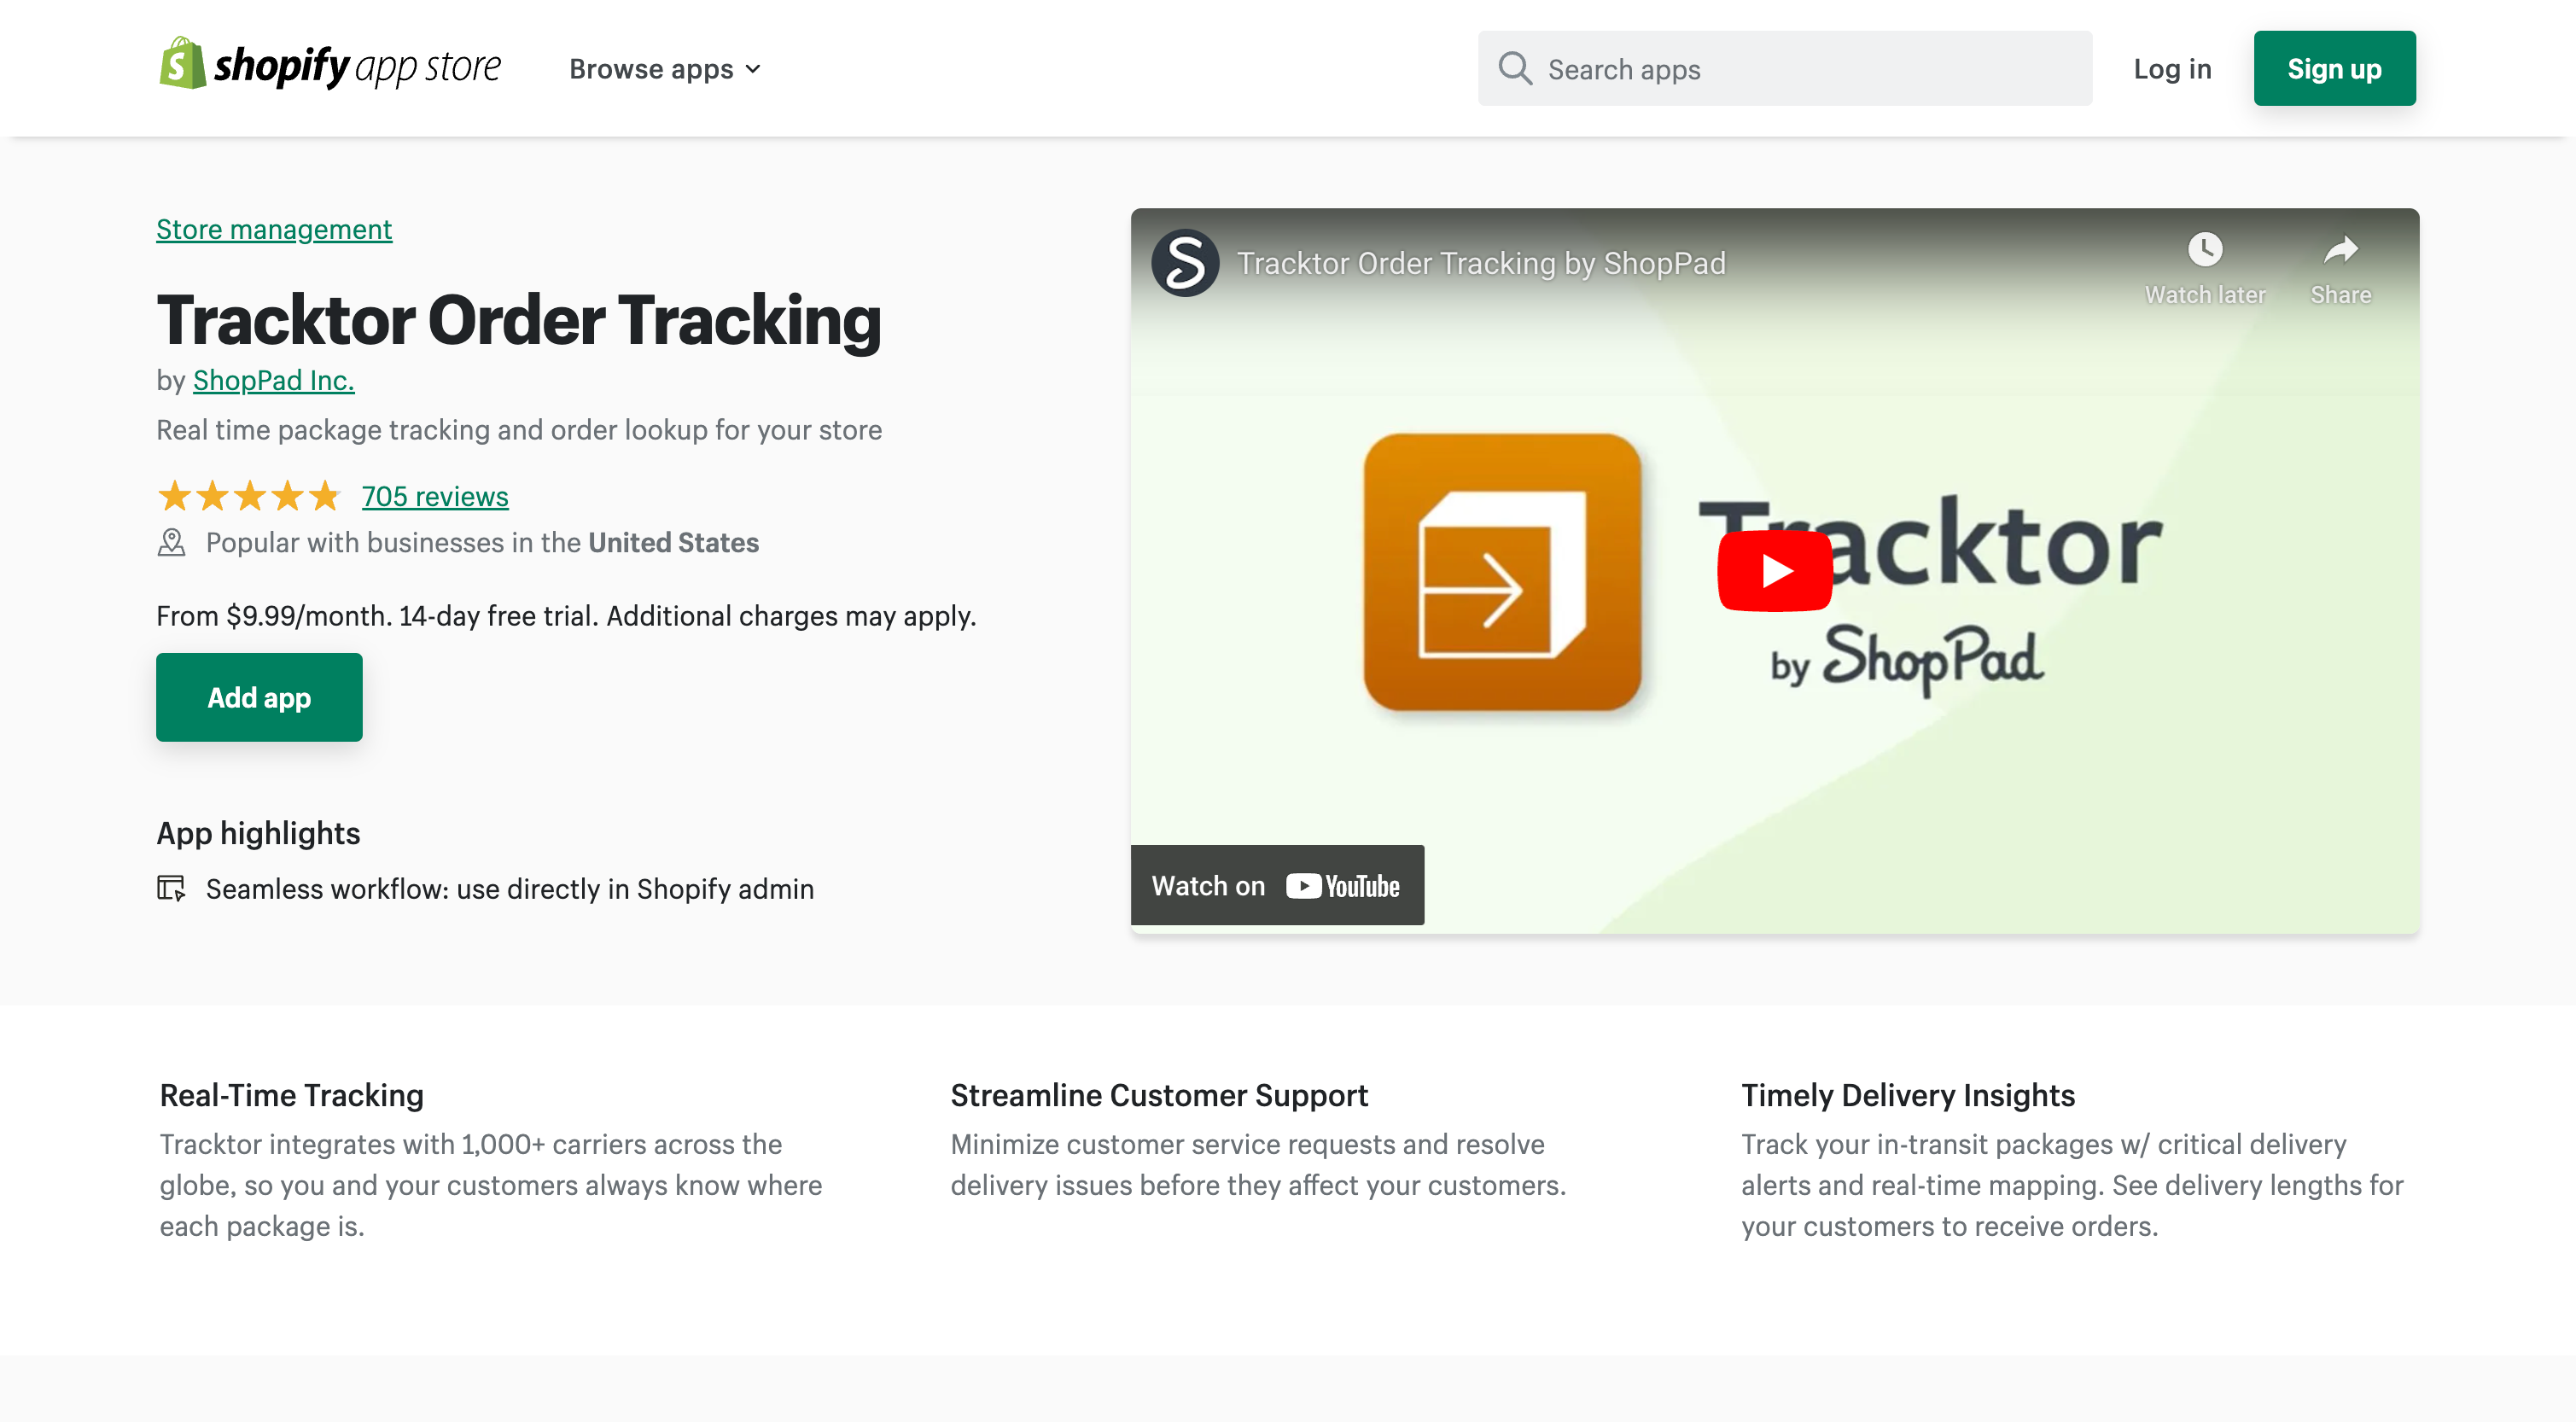 Tracktor Order Tracking - Real time package tracking and order lookup for your store | Shopify App Store